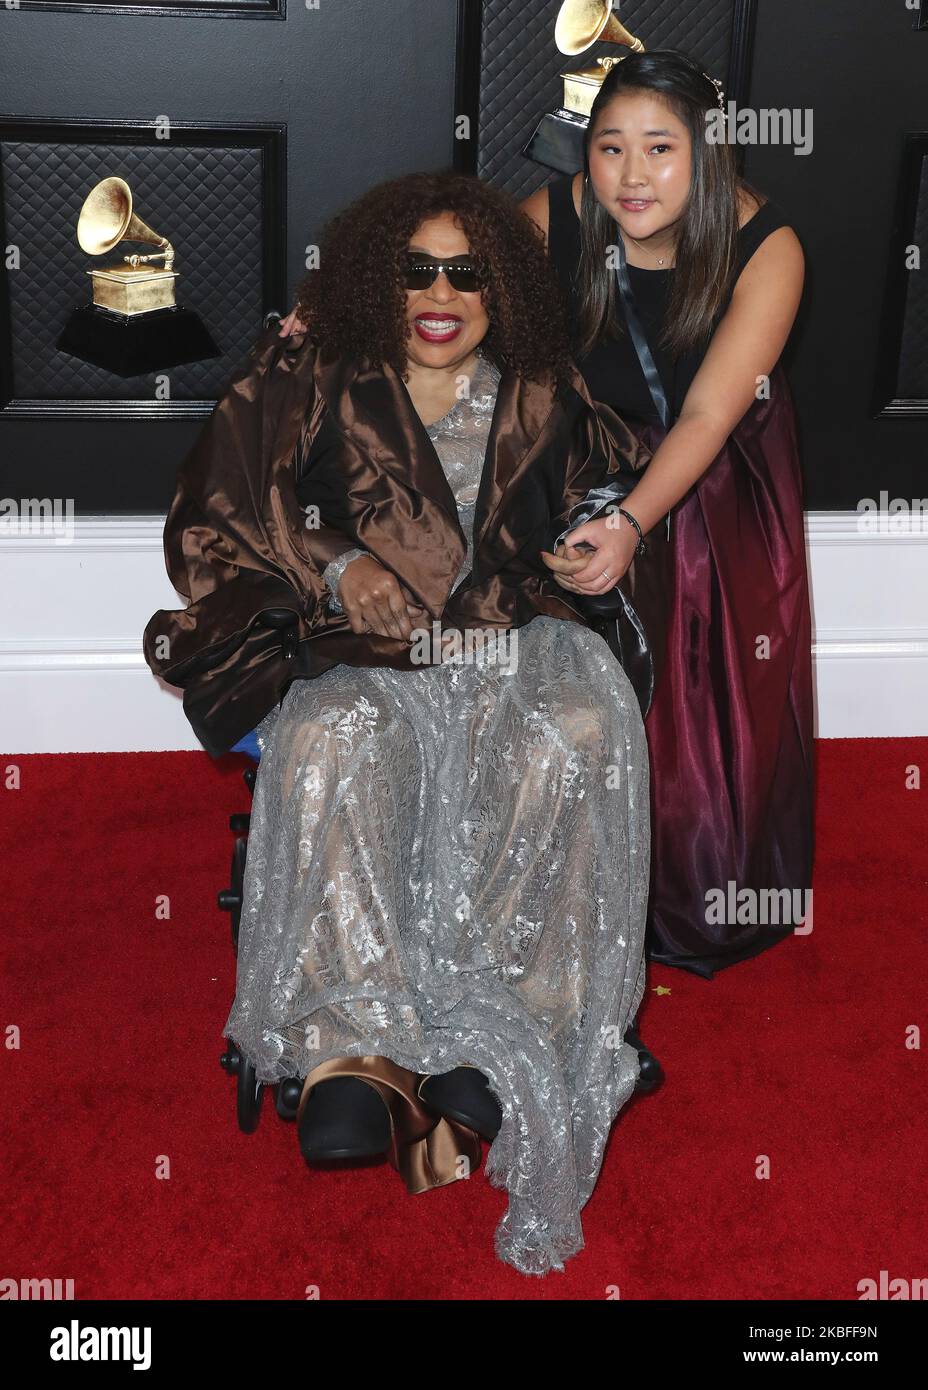 LOS ANGELES, CALIFORNIA, USA - JANUARY 26: Roberta Flack and Kira Koga arrive at the 62nd Annual GRAMMY Awards held at Staples Center on January 26, 2020 in Los Angeles, California, United States. (Photo by Xavier Collin/Image Press Agency/NurPhoto) Stock Photo